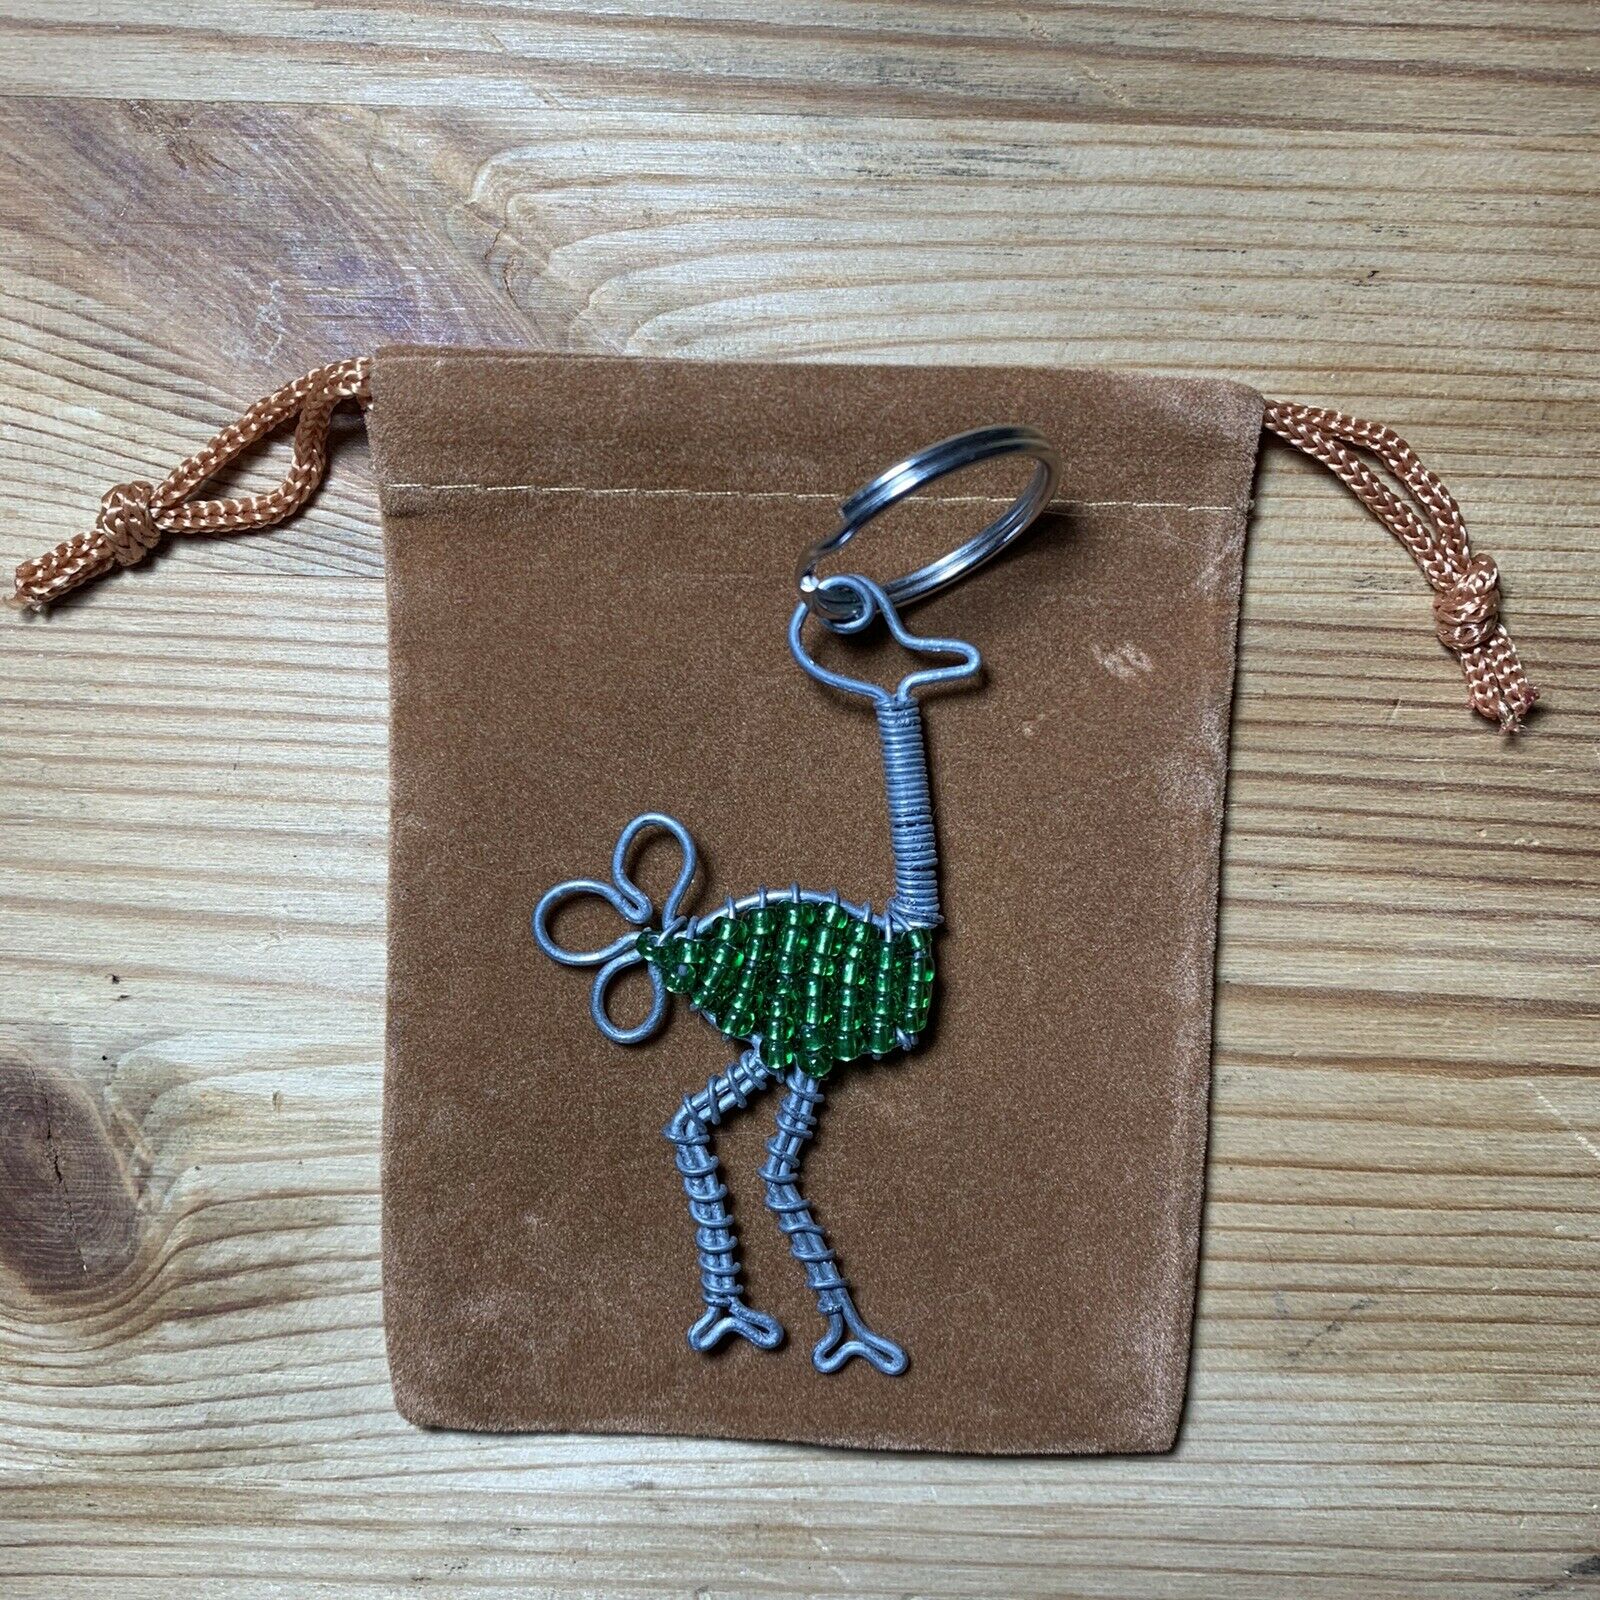 Custom Handmade Bead And Wire Ostrich Key Chain South Africa - Free Shipping